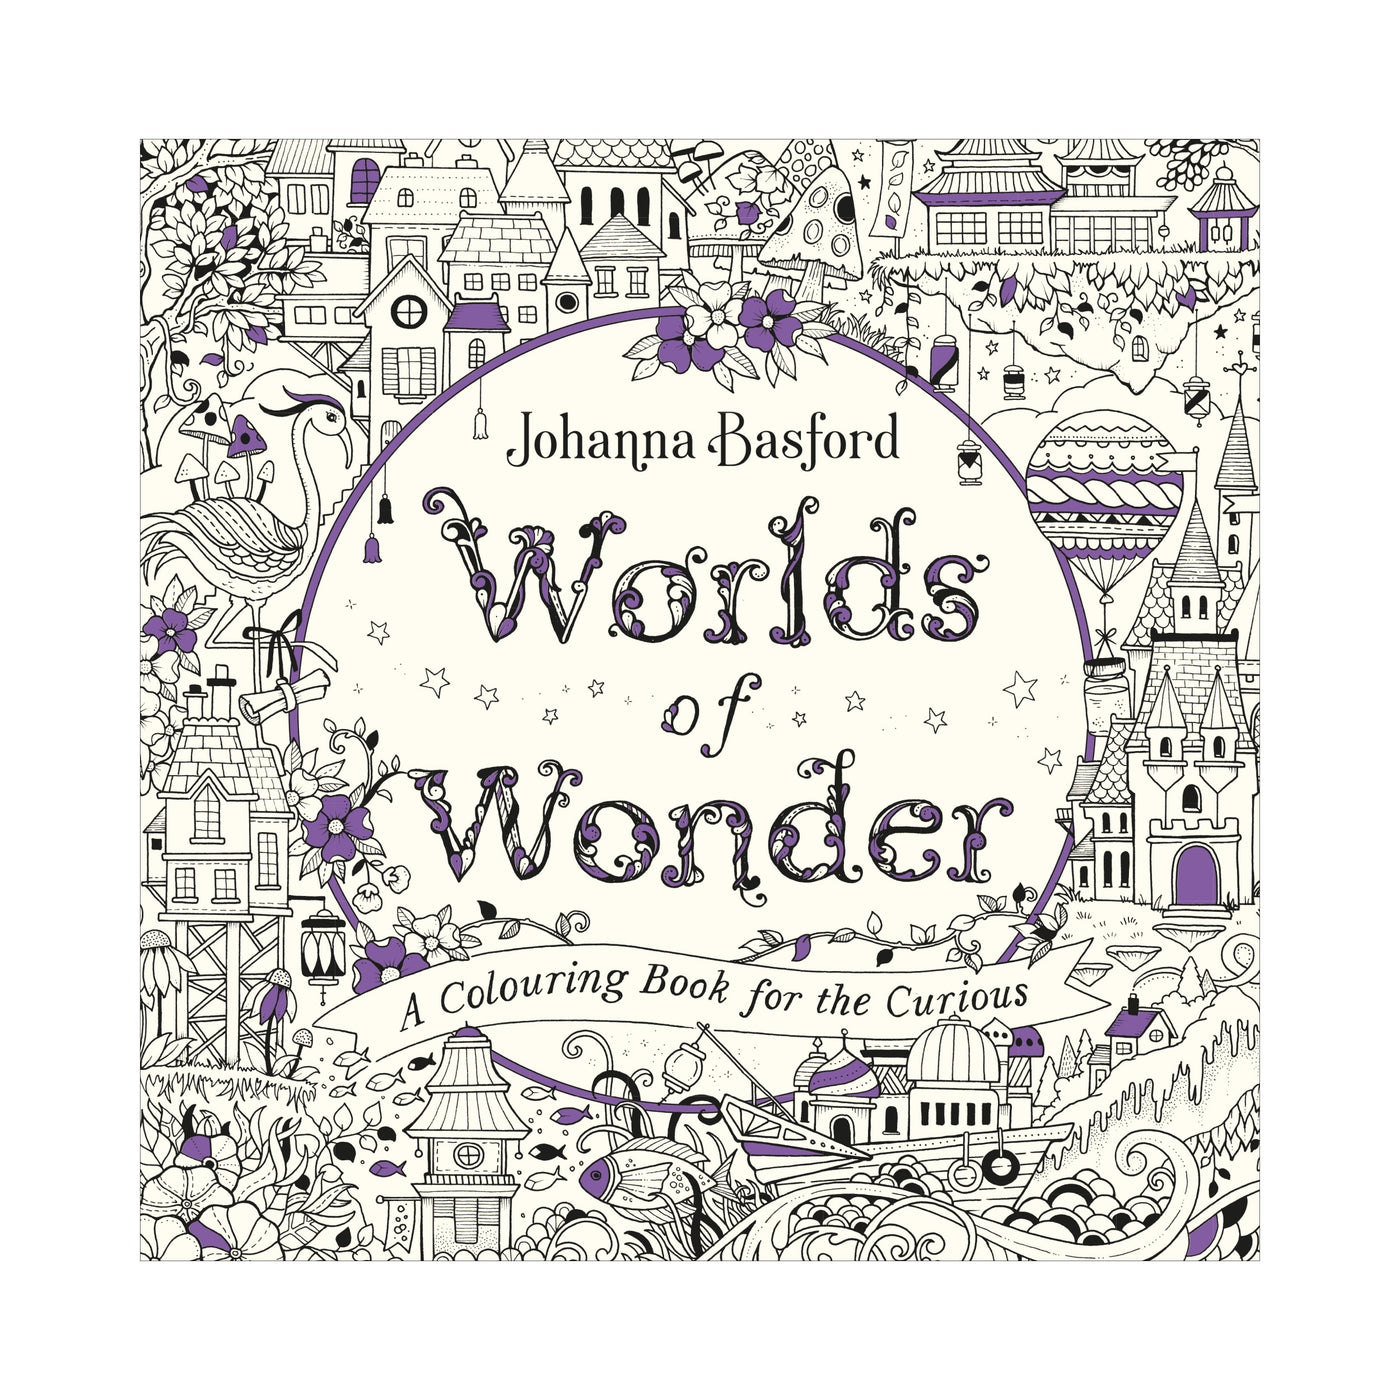 Worlds of Wonder - A Colouring Book for the Curious by Johanna Basford